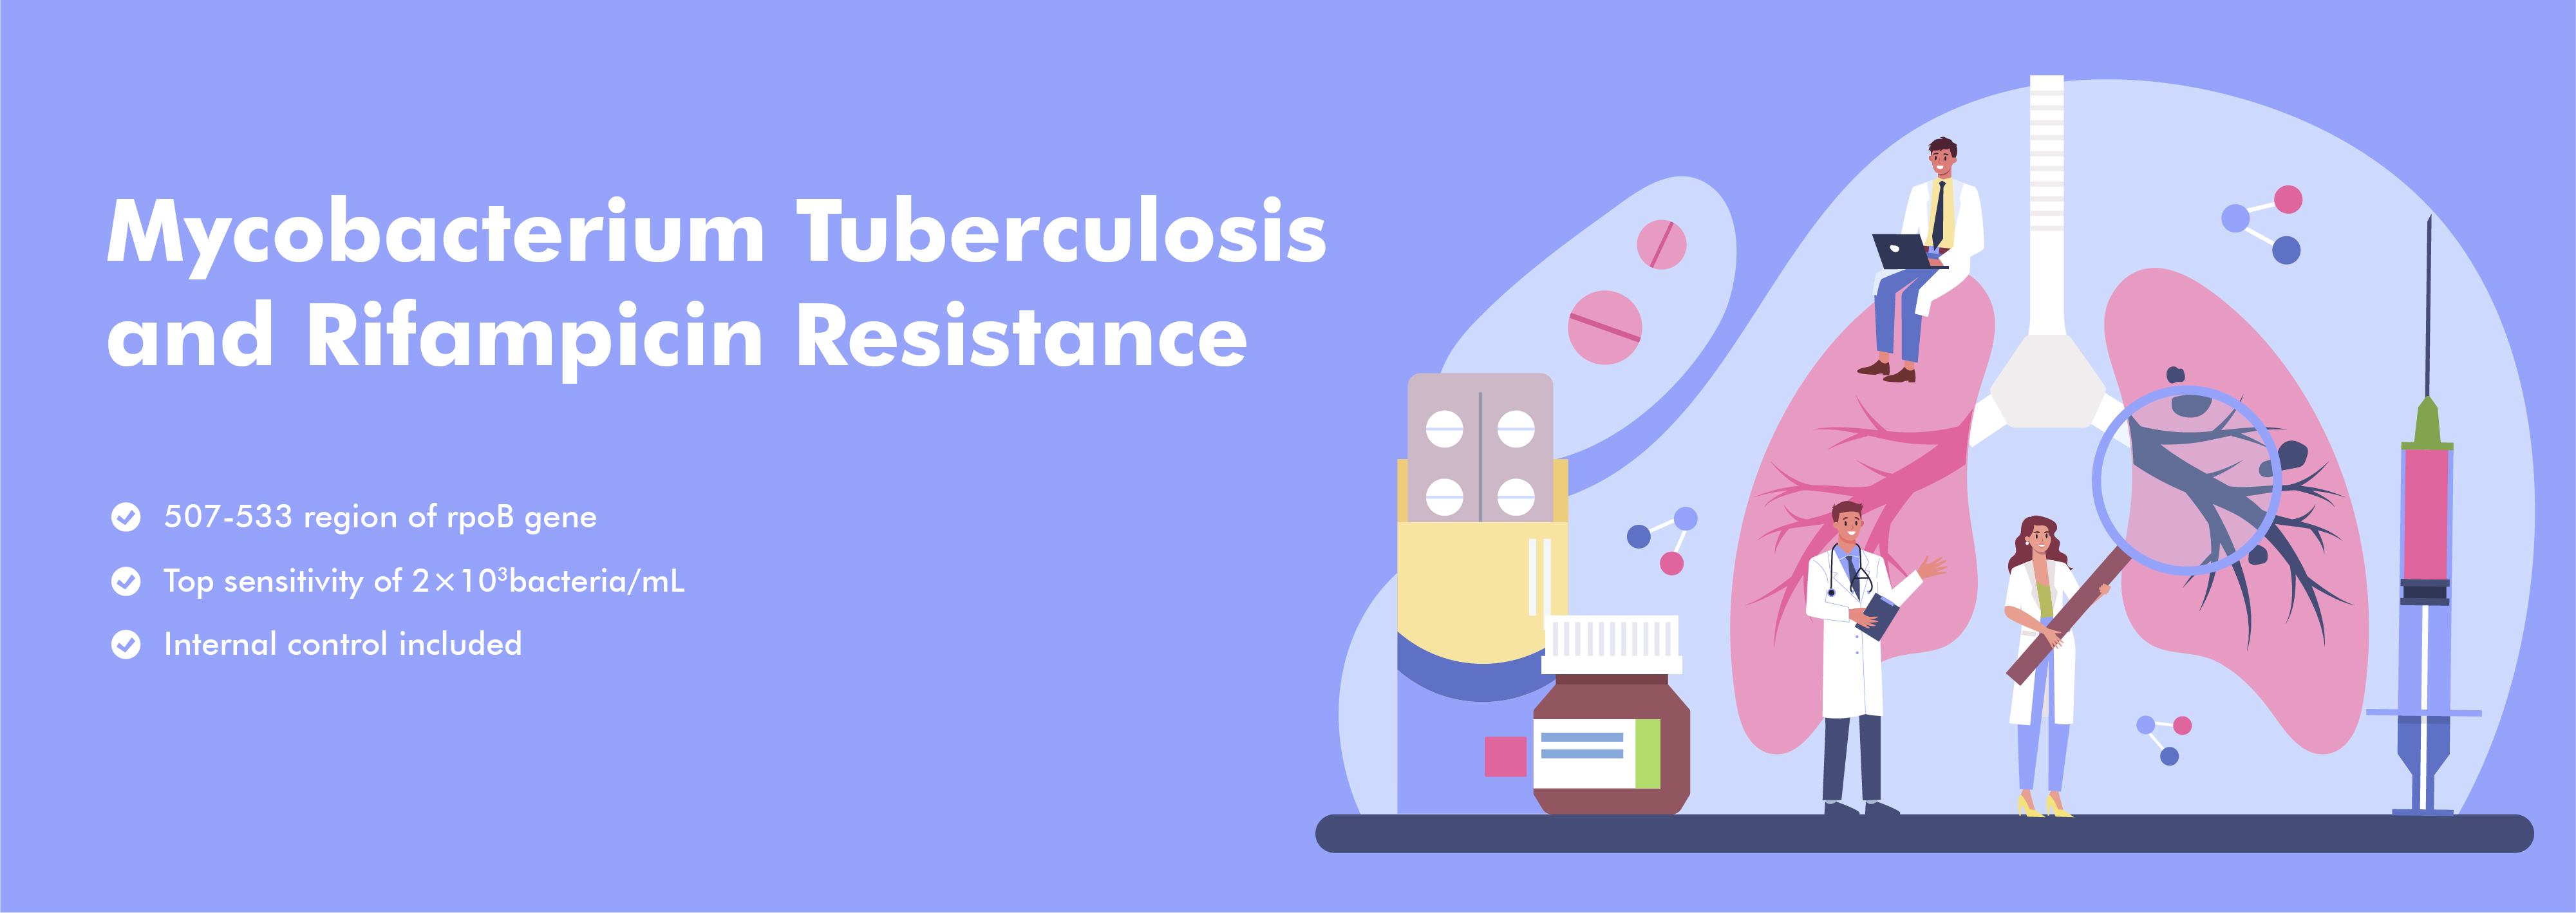 Mycobacterium Tuberculosis Nucleic Acid and Rifampicin Resistance